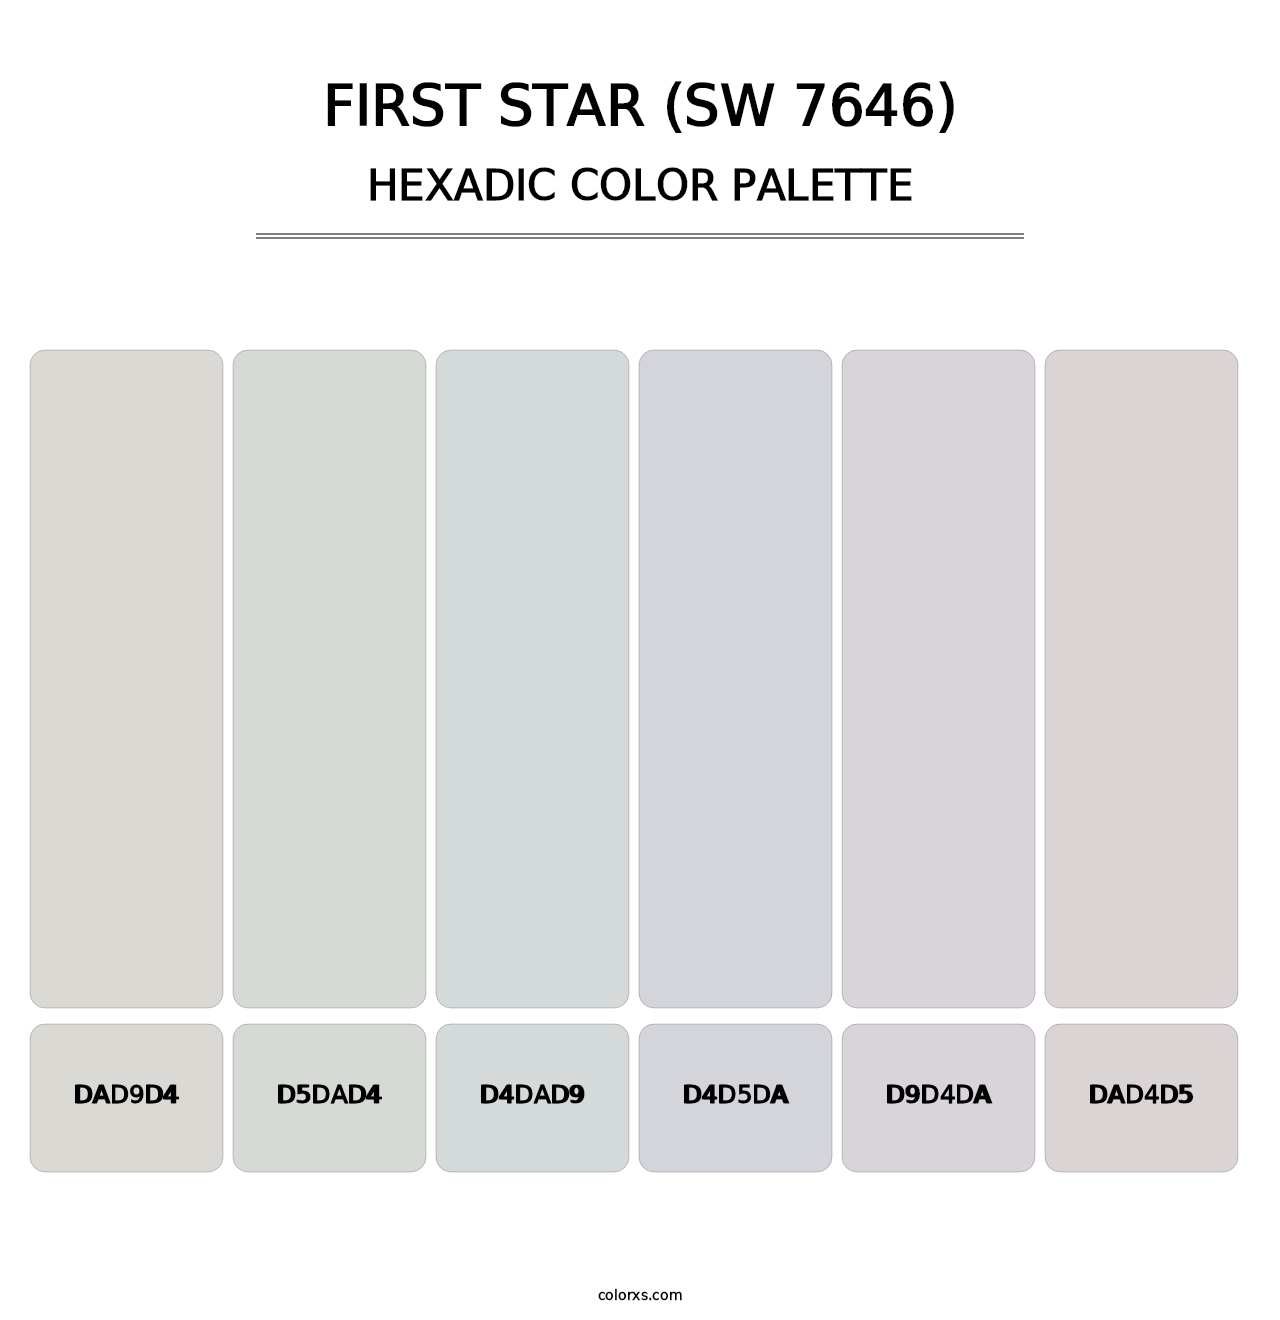 First Star (SW 7646) - Hexadic Color Palette